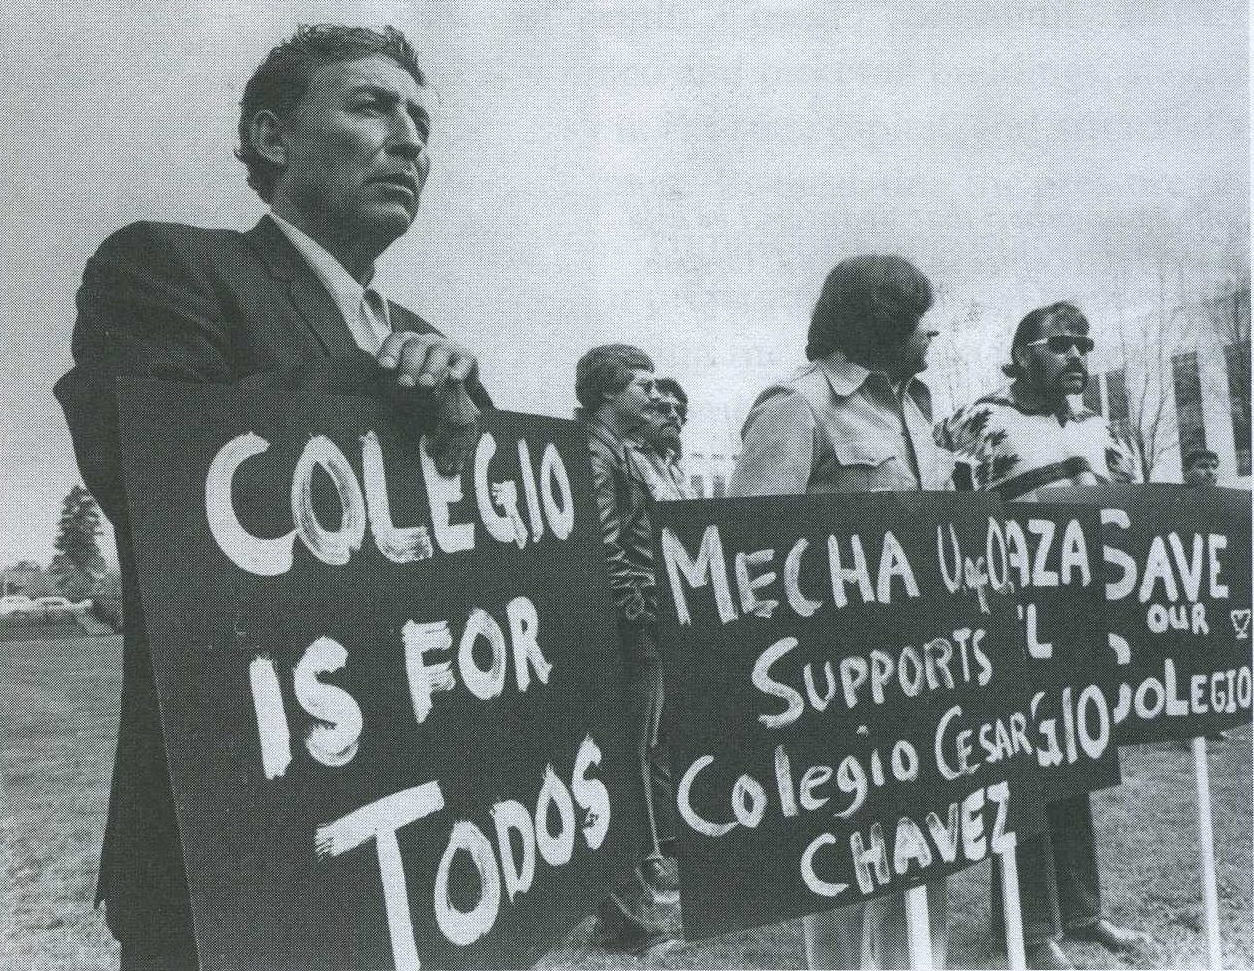 In black and white, a group of men stands behind picket signs that read, “Colegio is for todos” (College is for everyone), “MEChA U of O supports Colegio Cesar Chavez” and “Save Our Colegio”